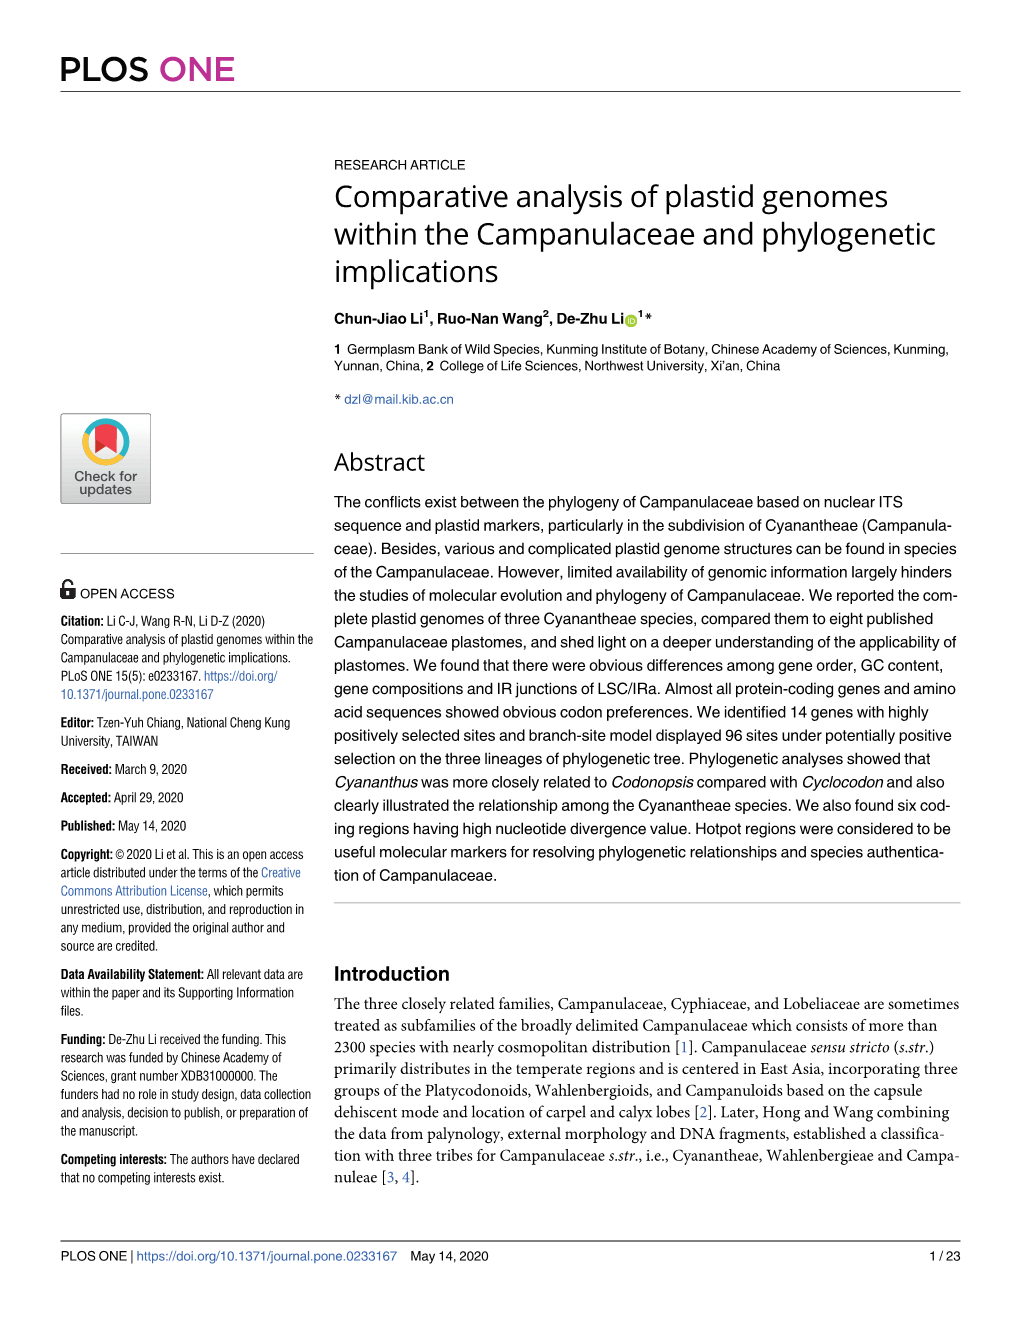 Comparative Analysis of Plastid Genomes Within the Campanulaceae and Phylogenetic Implications